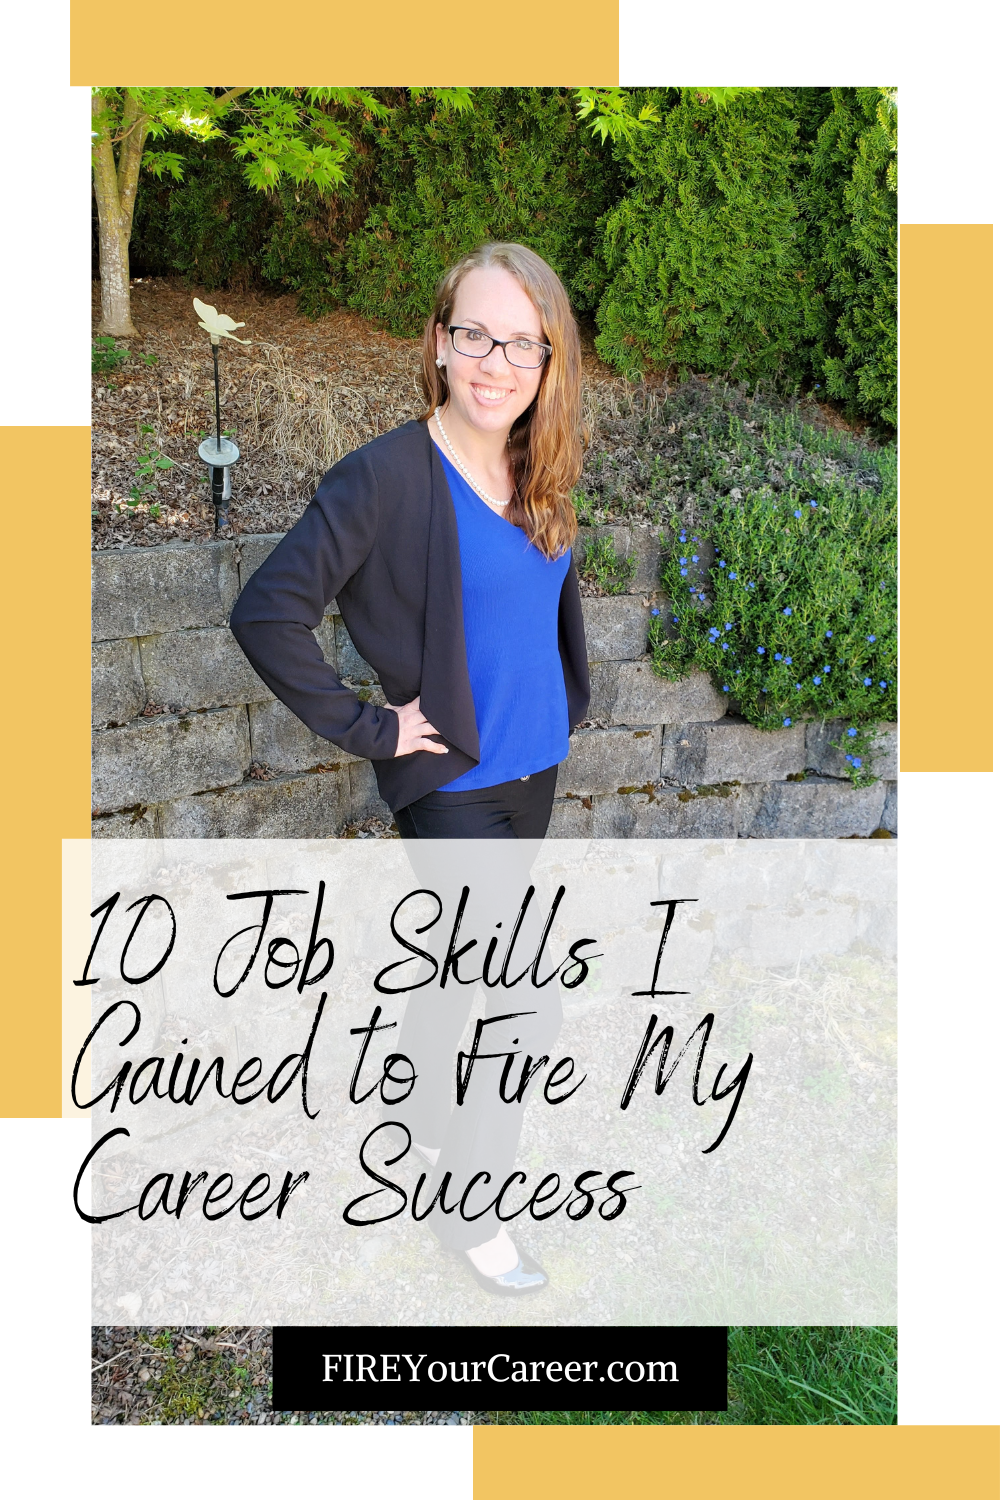 10 Job Skills I Gained to Fire My Career Success Pinterest